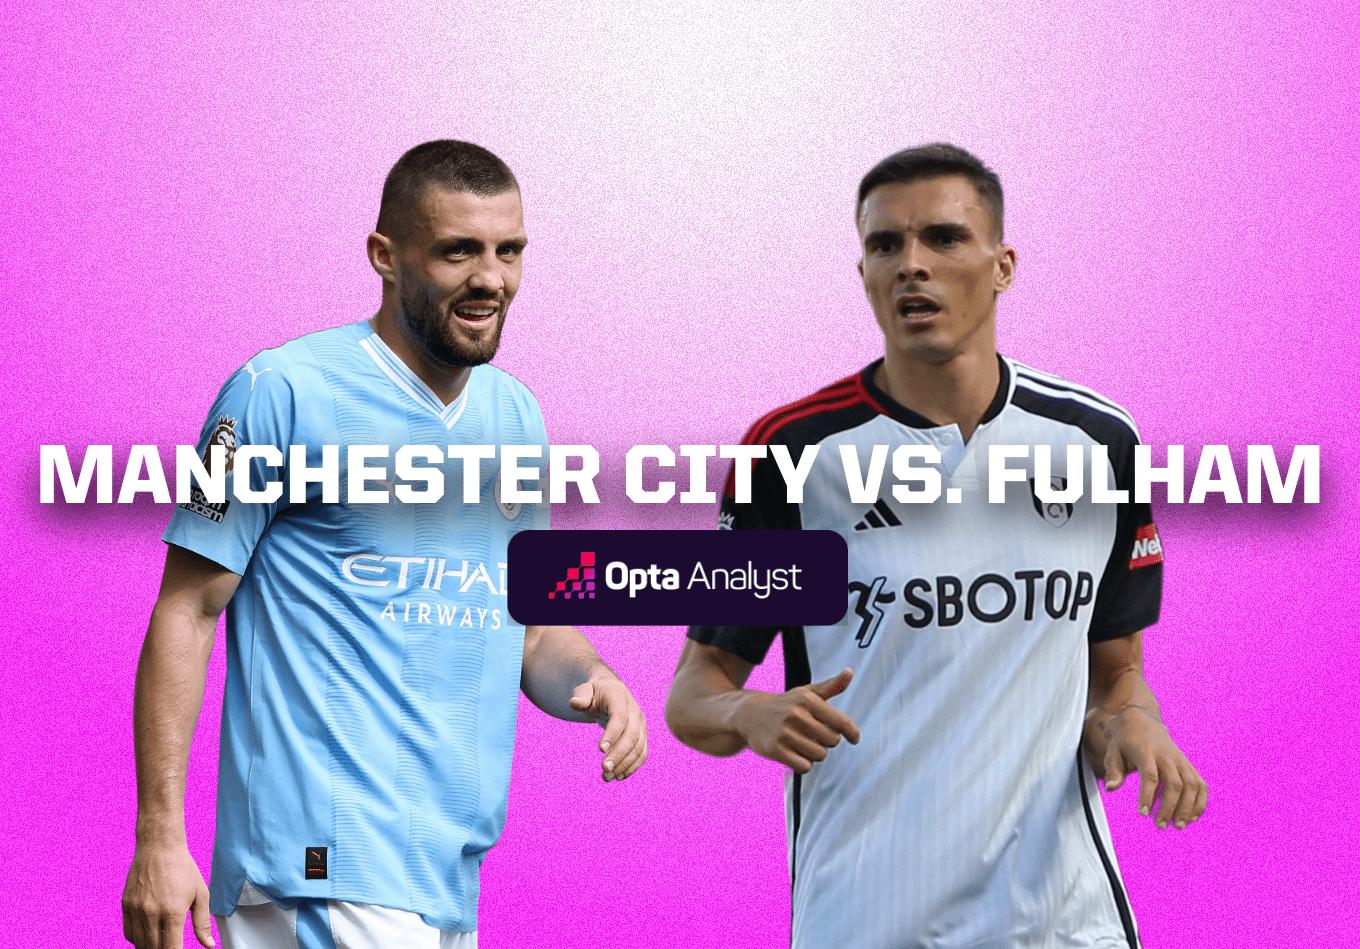 Manchester City vs Fulham: Prediction and Preview